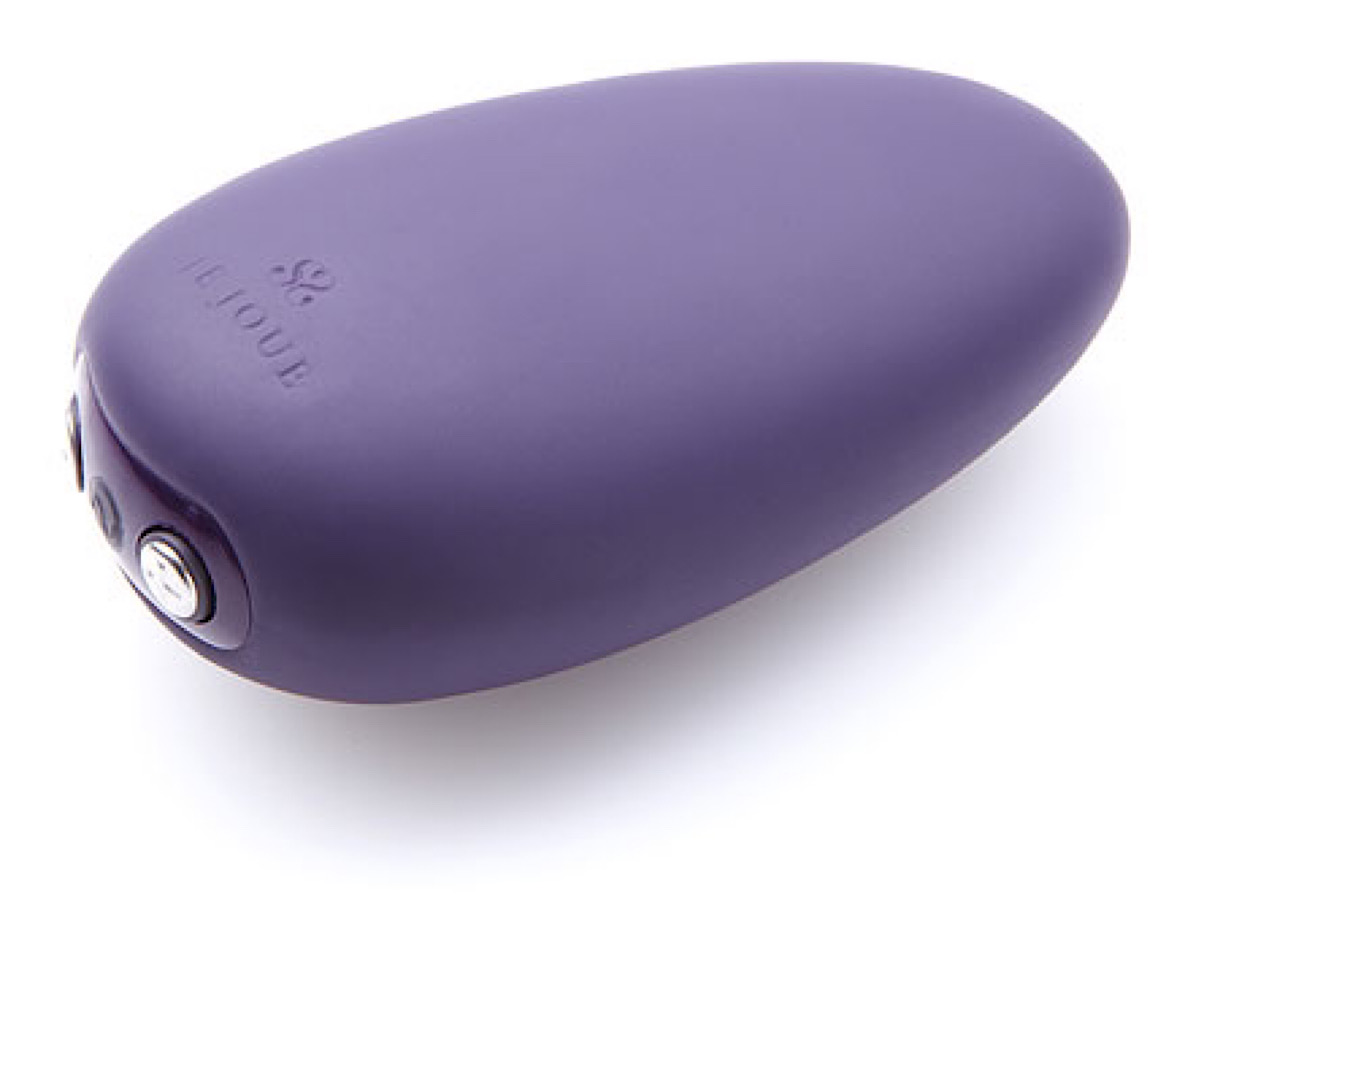 A purple pebble-shaped silicone sex toy, MiMi. The perfect steamy stocking stuffer. 